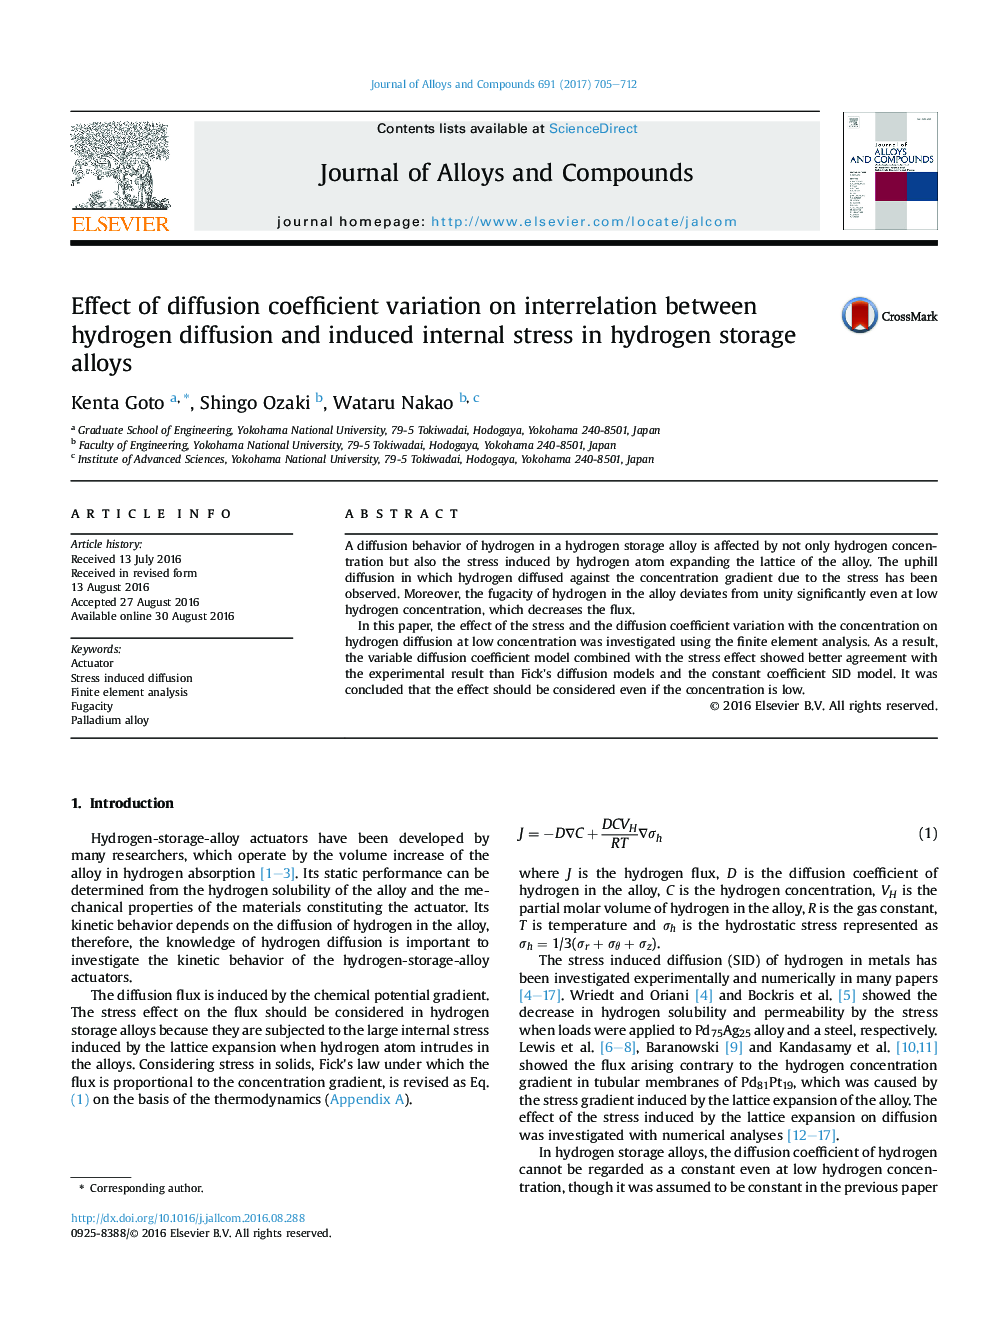 Effect of diffusion coefficient variation on interrelation between hydrogen diffusion and induced internal stress in hydrogen storage alloys